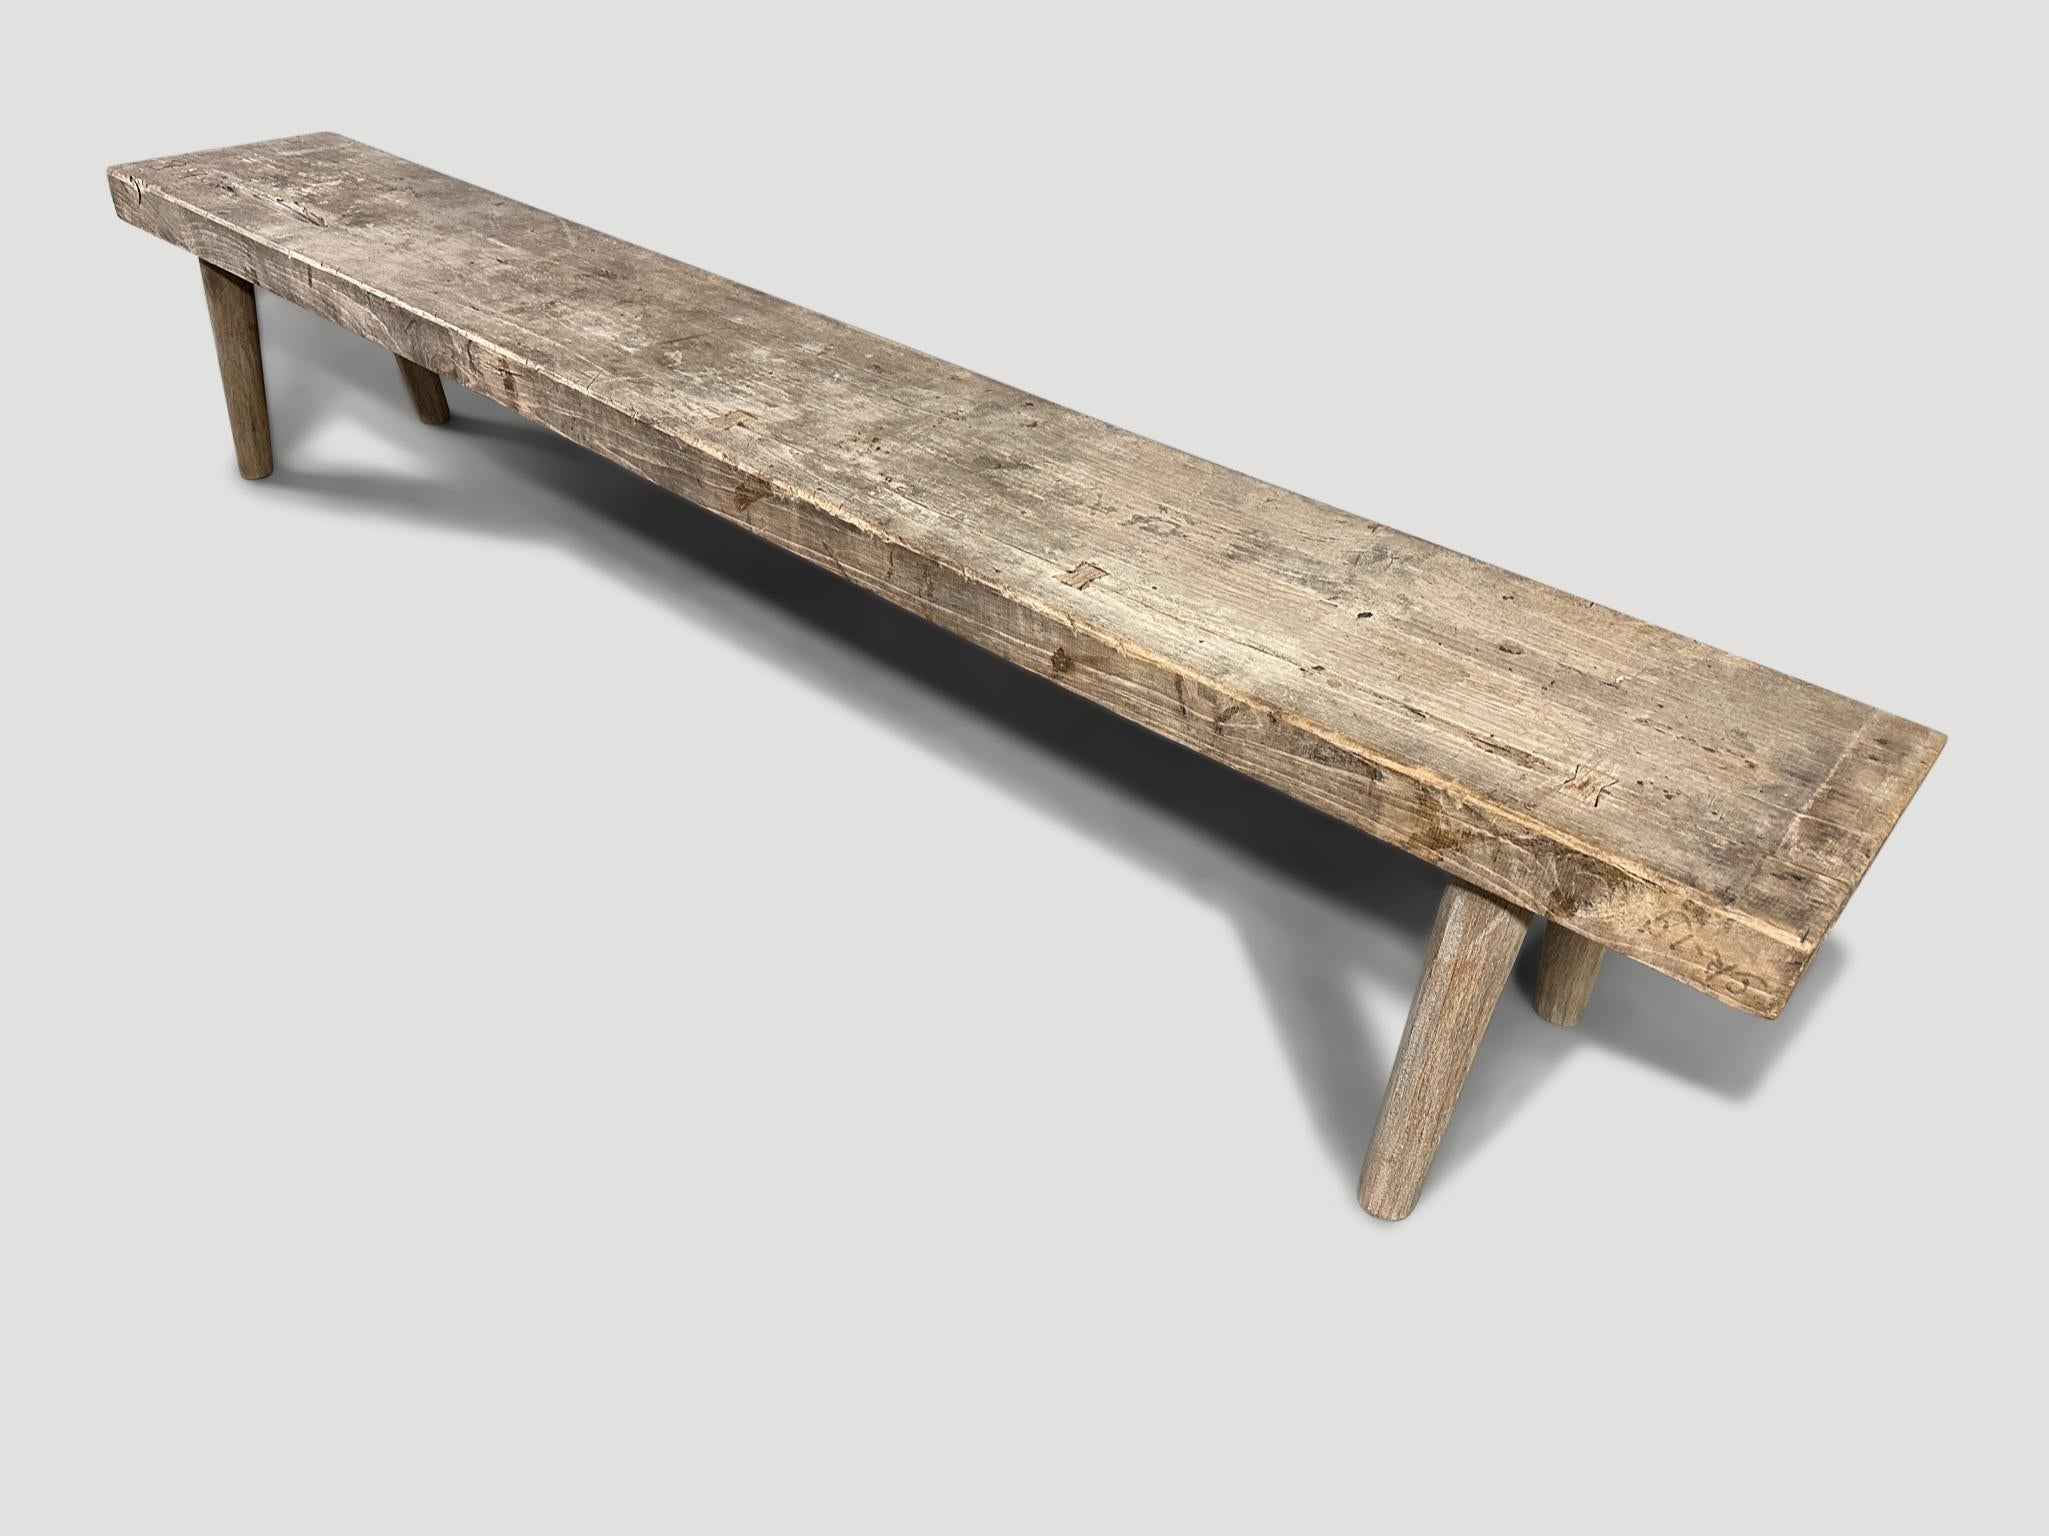 Antique Wabi Sabi bench with beautiful wood tones. A single wide aged 2.5” thick teak slab celebrating the cracks and crevices that time and loving use have left behind. We added smooth teak minimalist legs and butterflies inlaid into the top. It’s